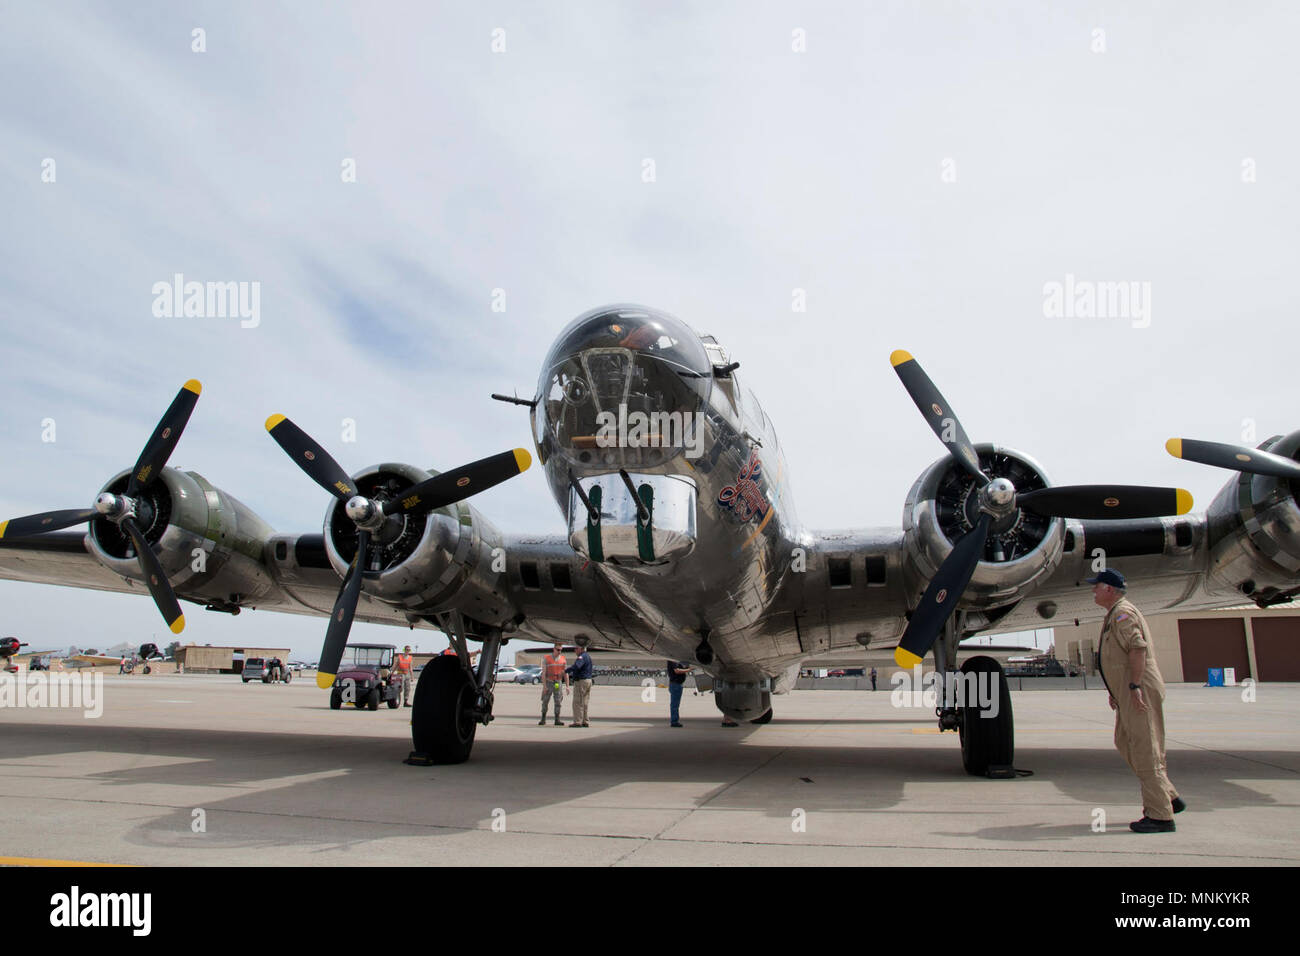 A B-17 Flying Fortress lands at Luke Air Force Base, Ariz., for Luke Days on March 16, 2018. Luke Days presents military airpower and civilian acts over two days from March 17-18 to a public audience of hundreds of thousands of attendees from Arizona and around the world. Stock Photo